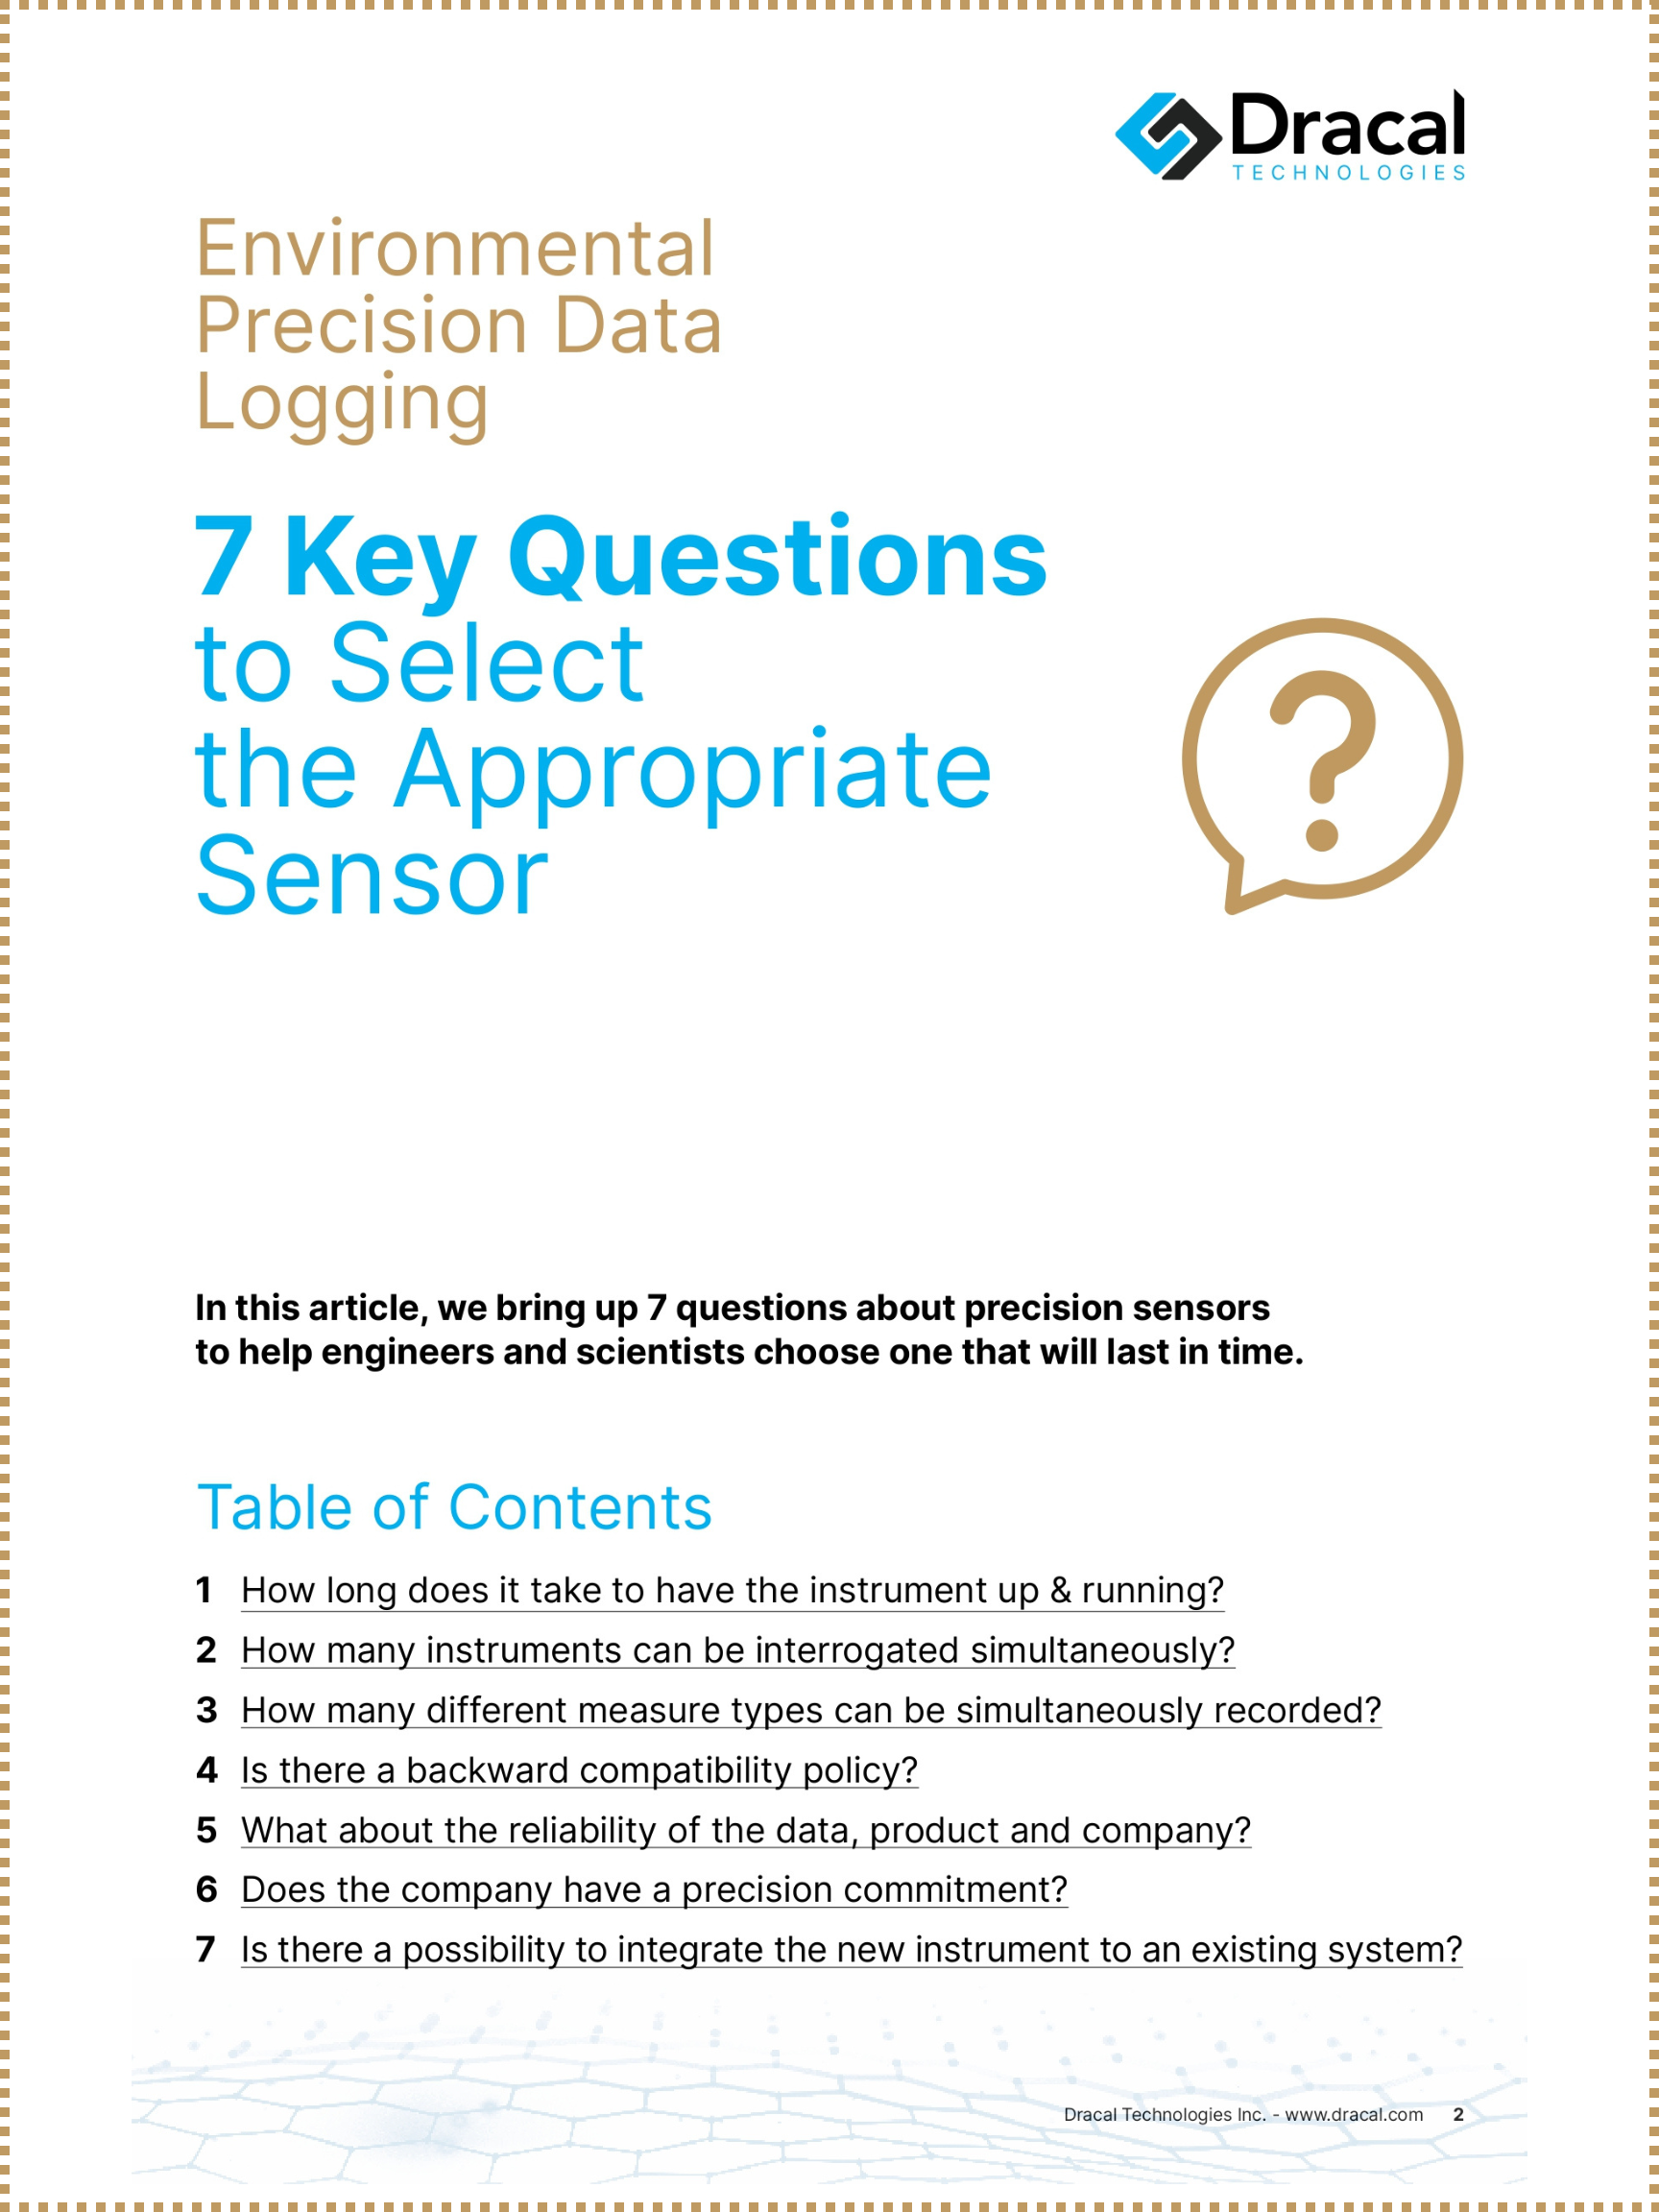 Cover page and table of contents for the whitepaper about 7 questions to help pick the right precision sensor